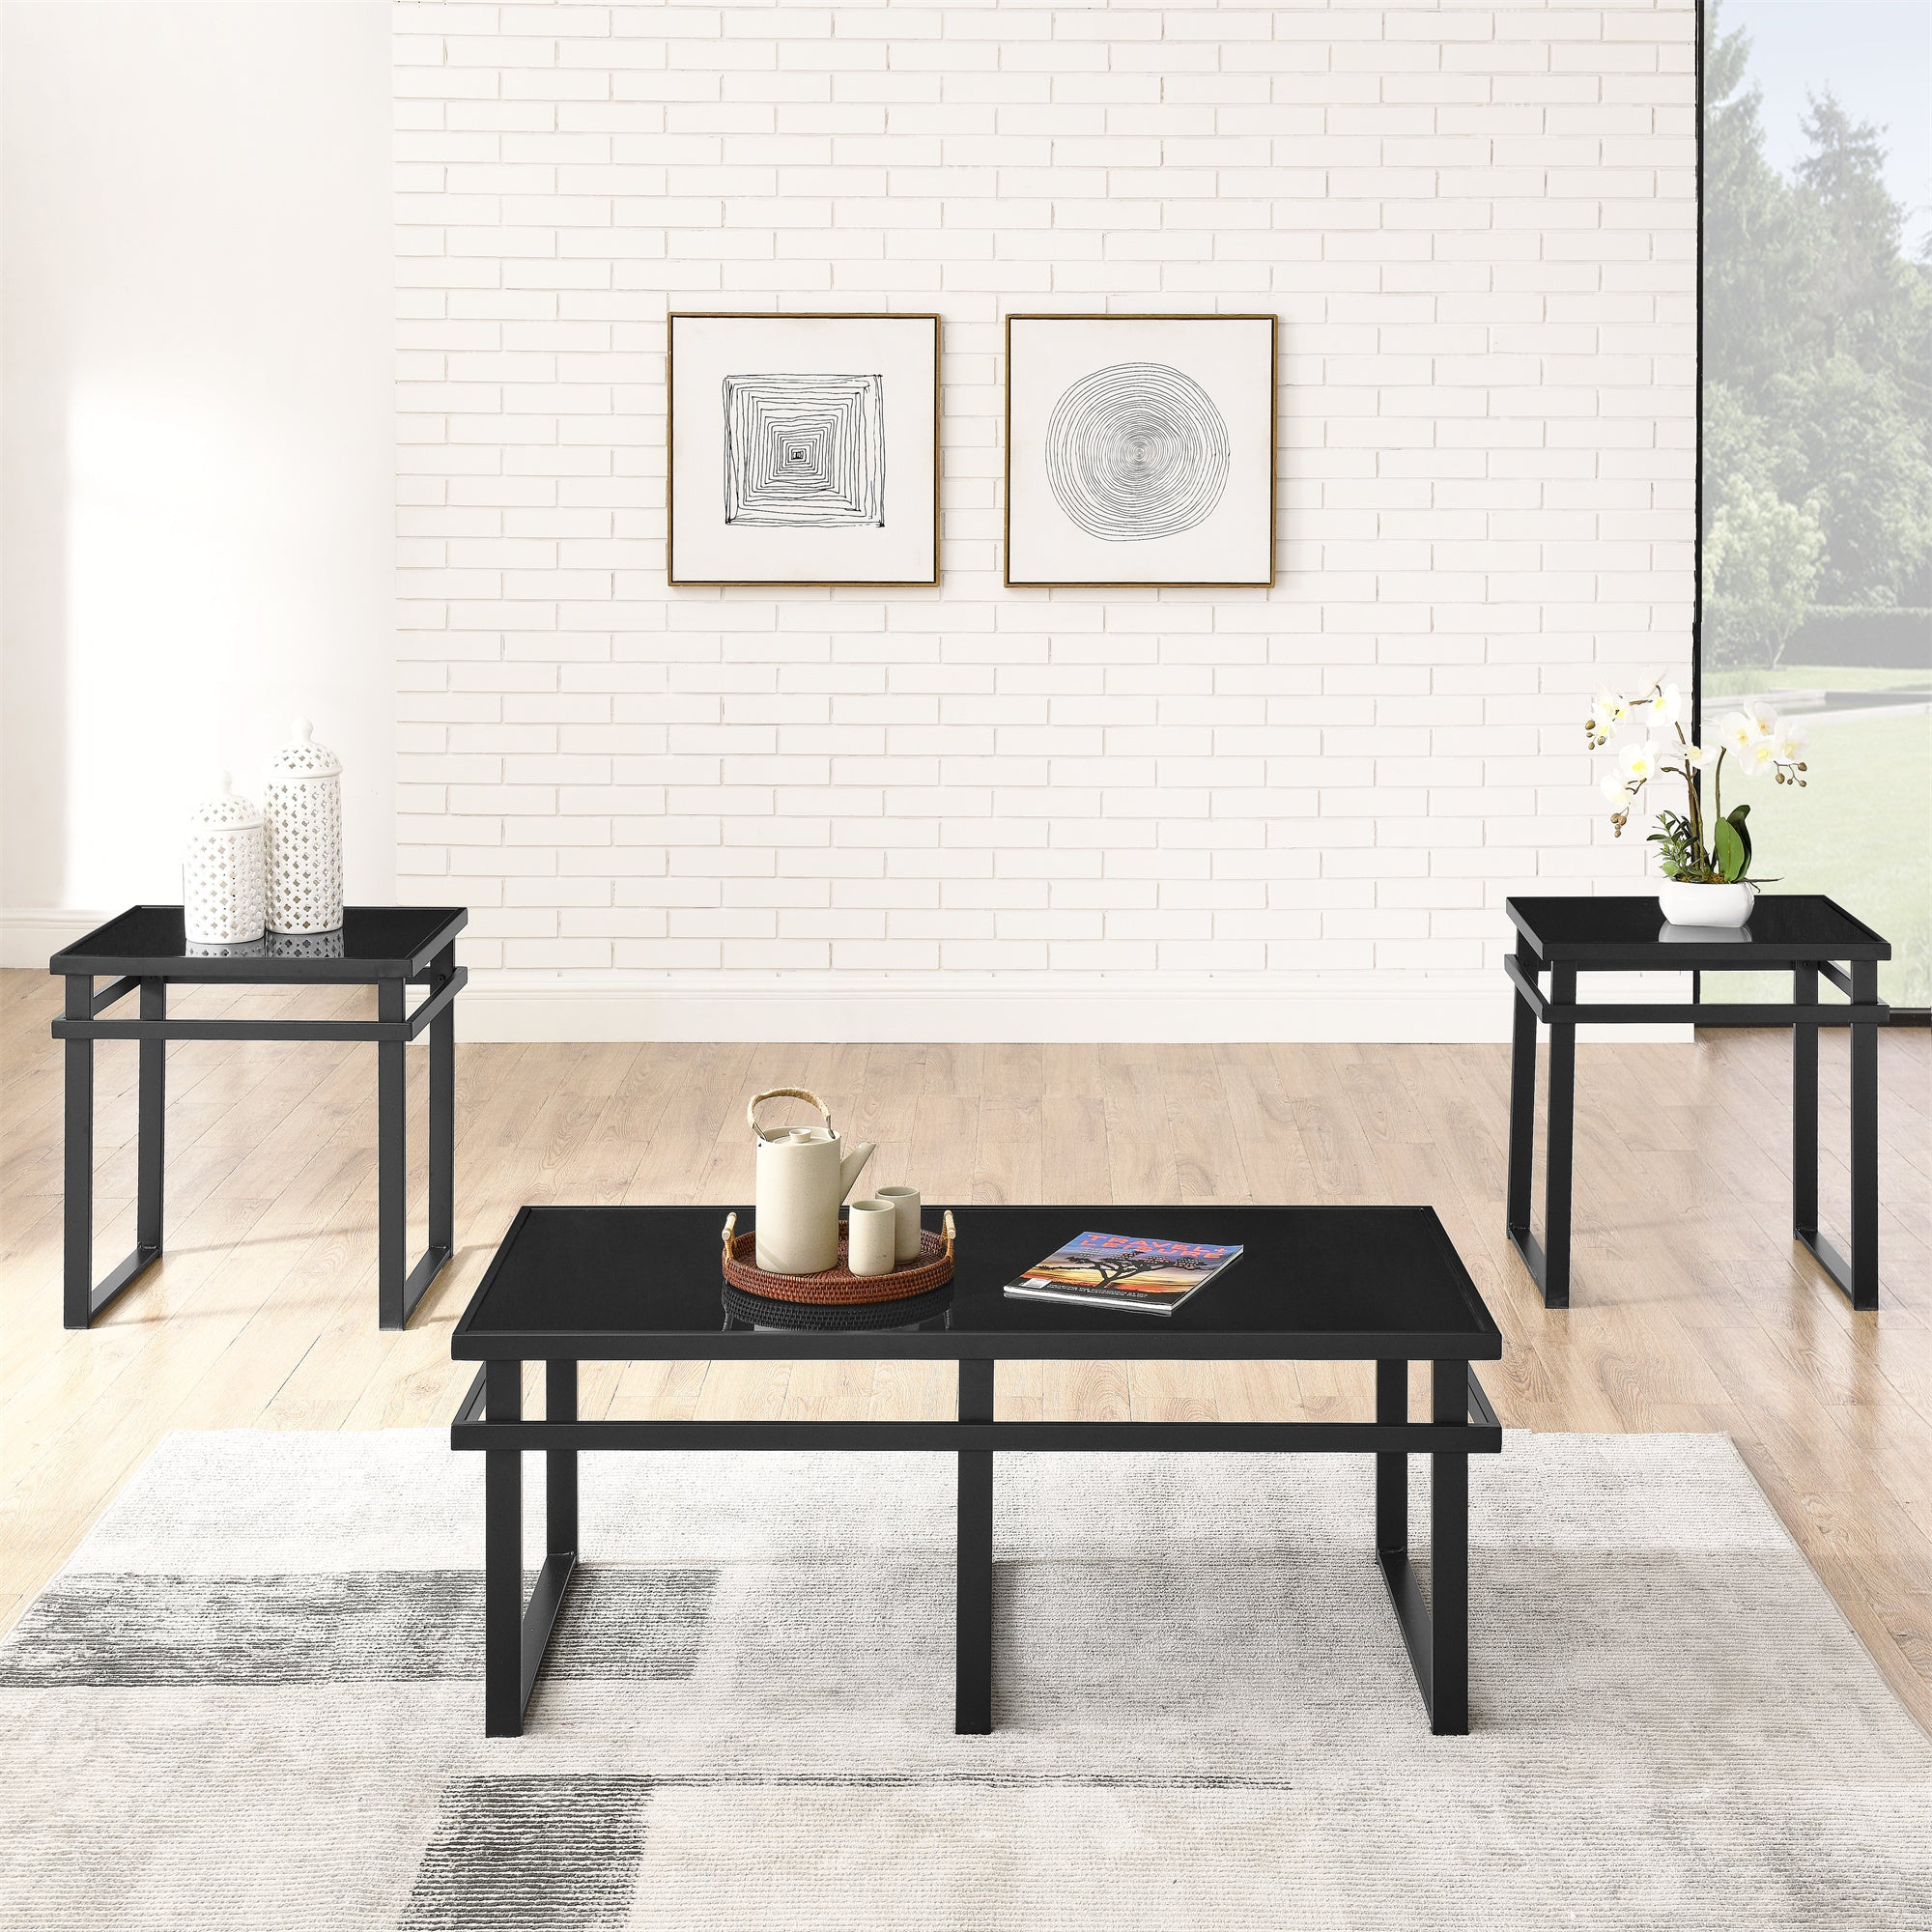 🆓🚛 Modern 3-Piece Table Set, Includes 1 Coffee Table and 2 End Tables With Black Glass Top and Metal Tube, Black